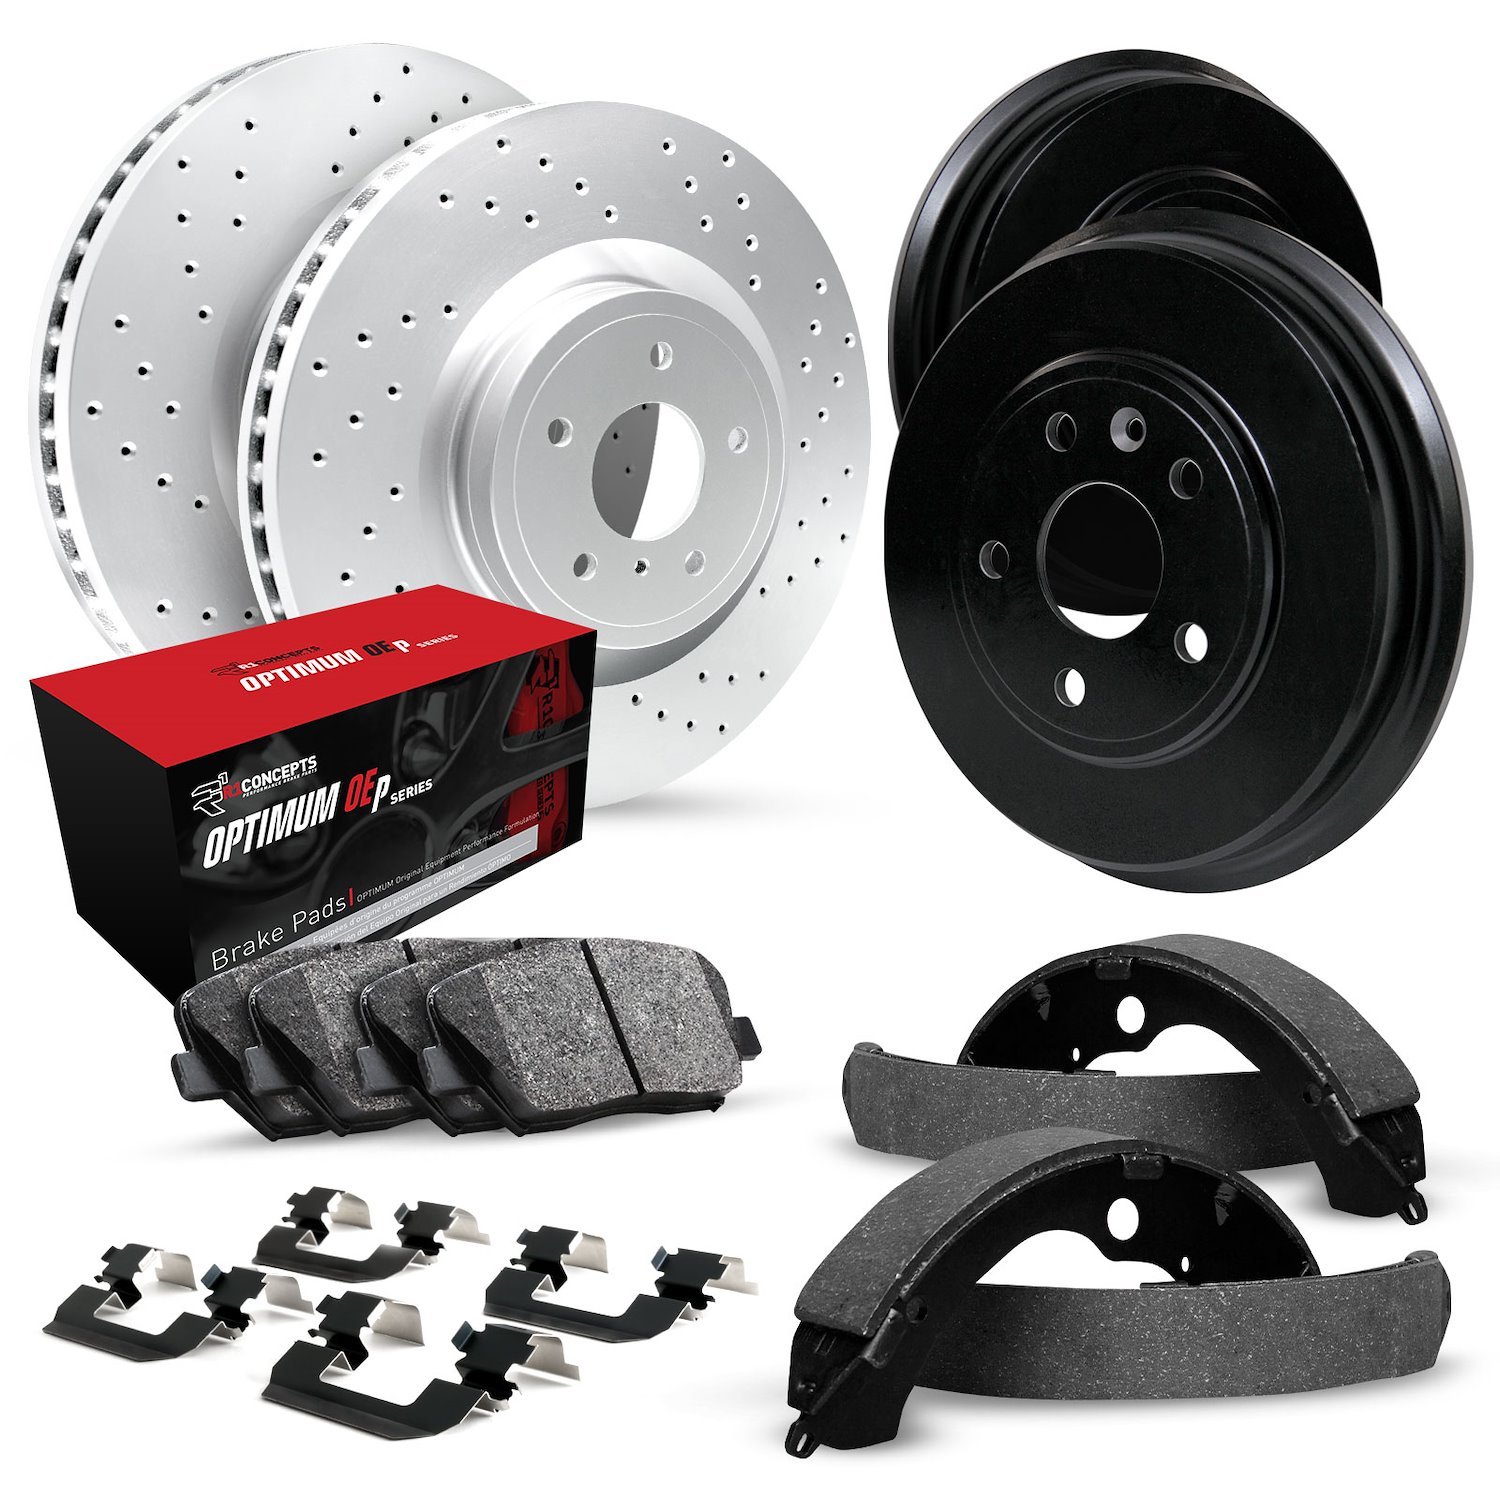 GEO-Carbon Drilled Brake Rotor & Drum Set w/Optimum OE Pads, Shoes, & Hardware, 1990-2002 GM, Position: Front & Rear